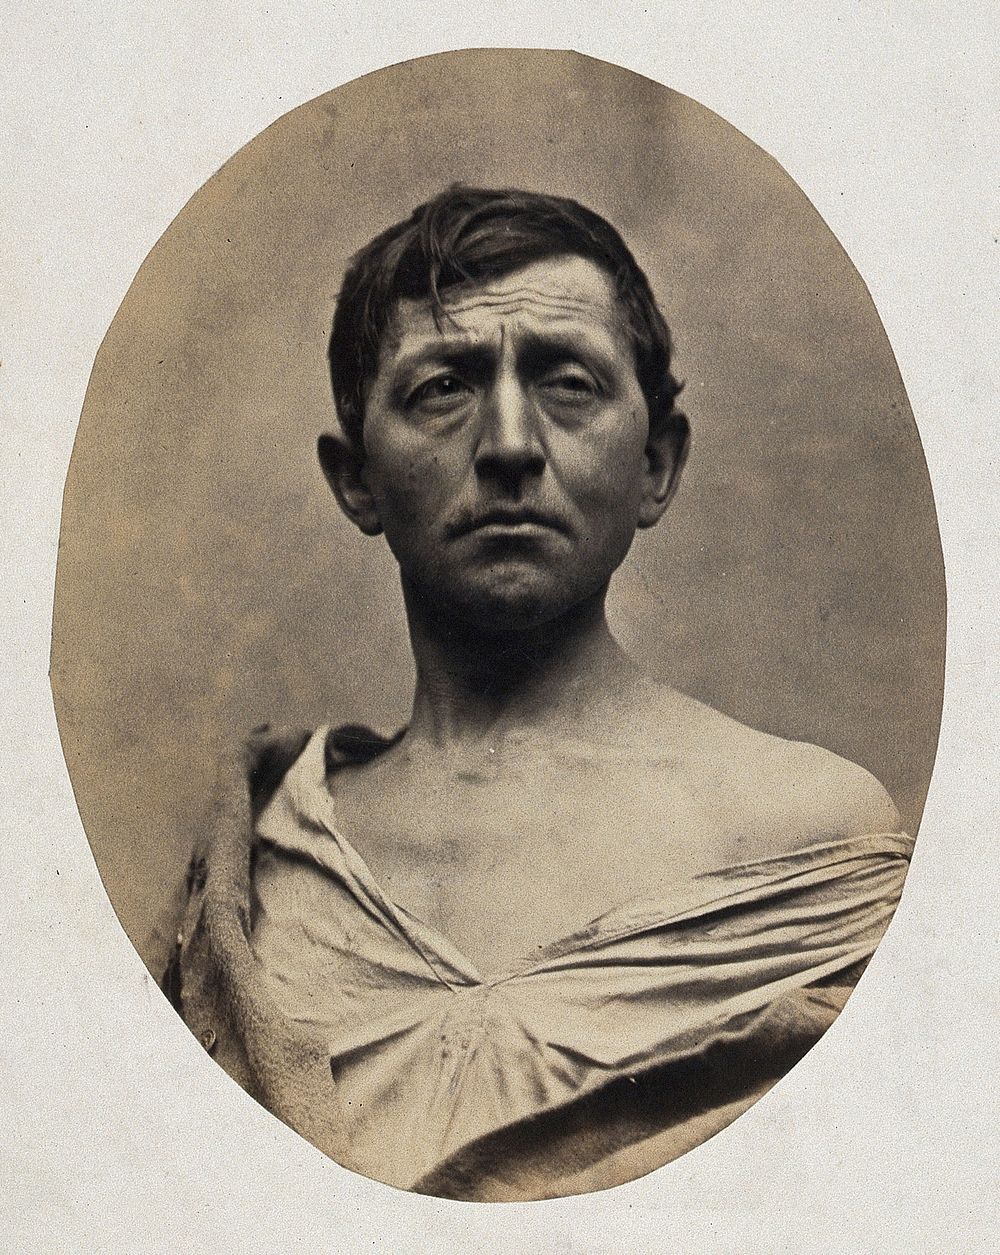 A man, head and shoulders; his shirt undone. Photograph by L. Haase after H.W. Berend, 1863.